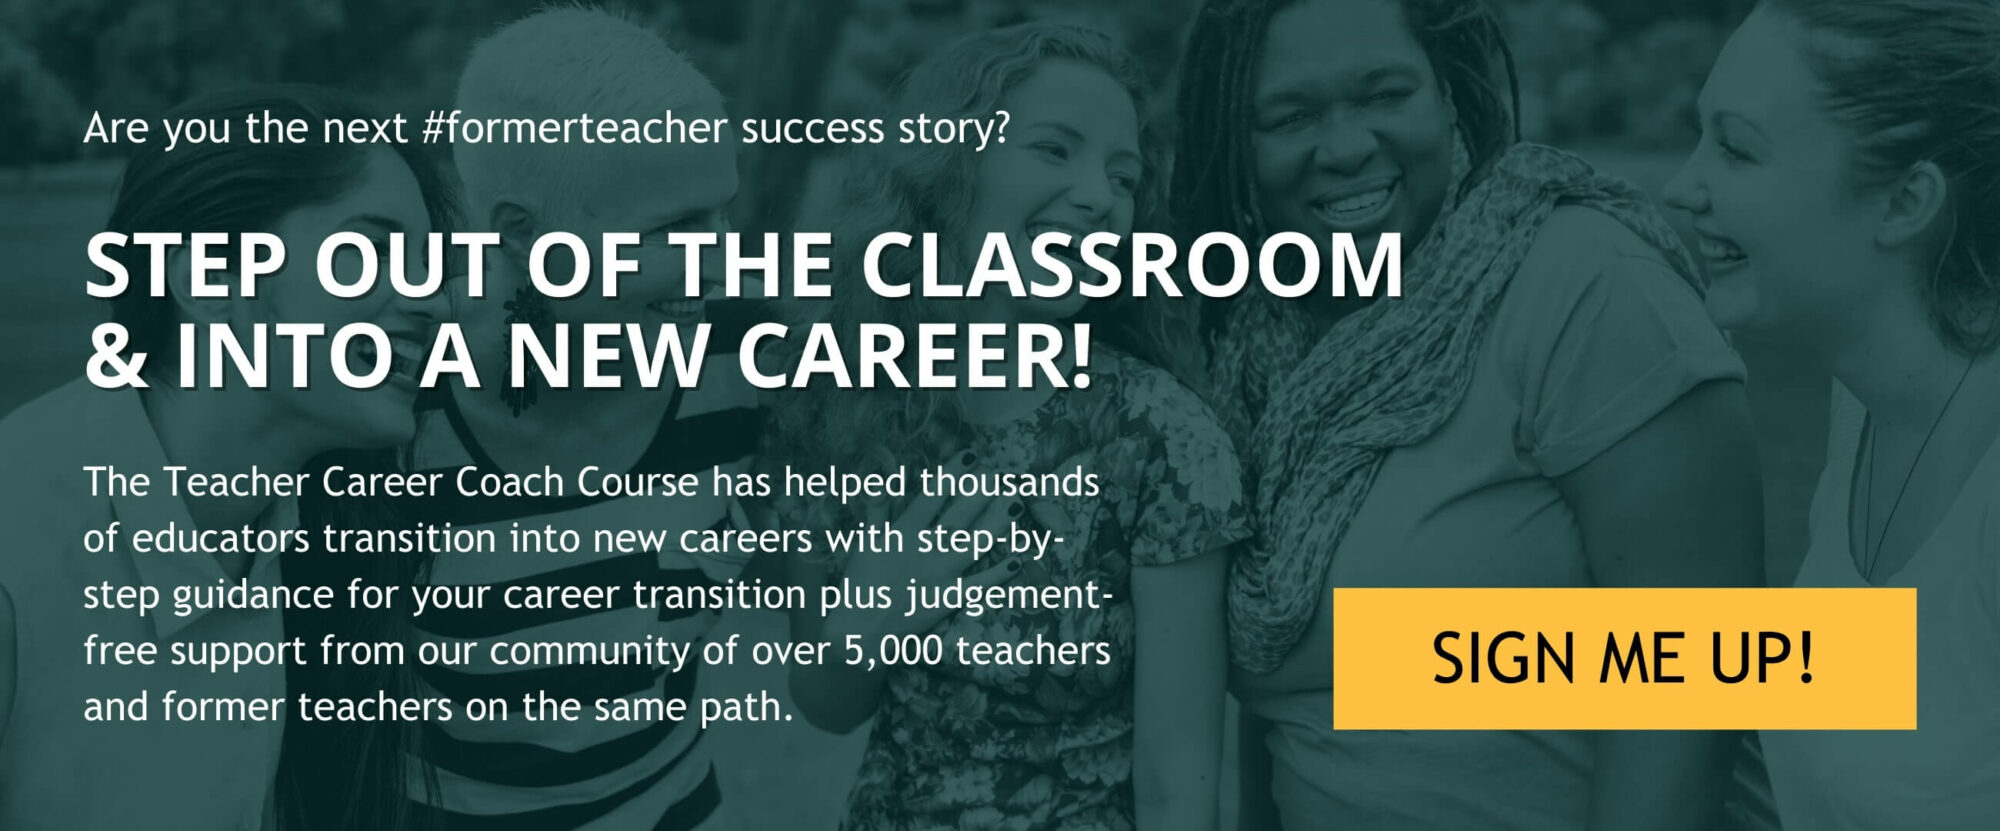 A CTA image banner for the Teacher Career Coach program for former teachers looking to start a new career.